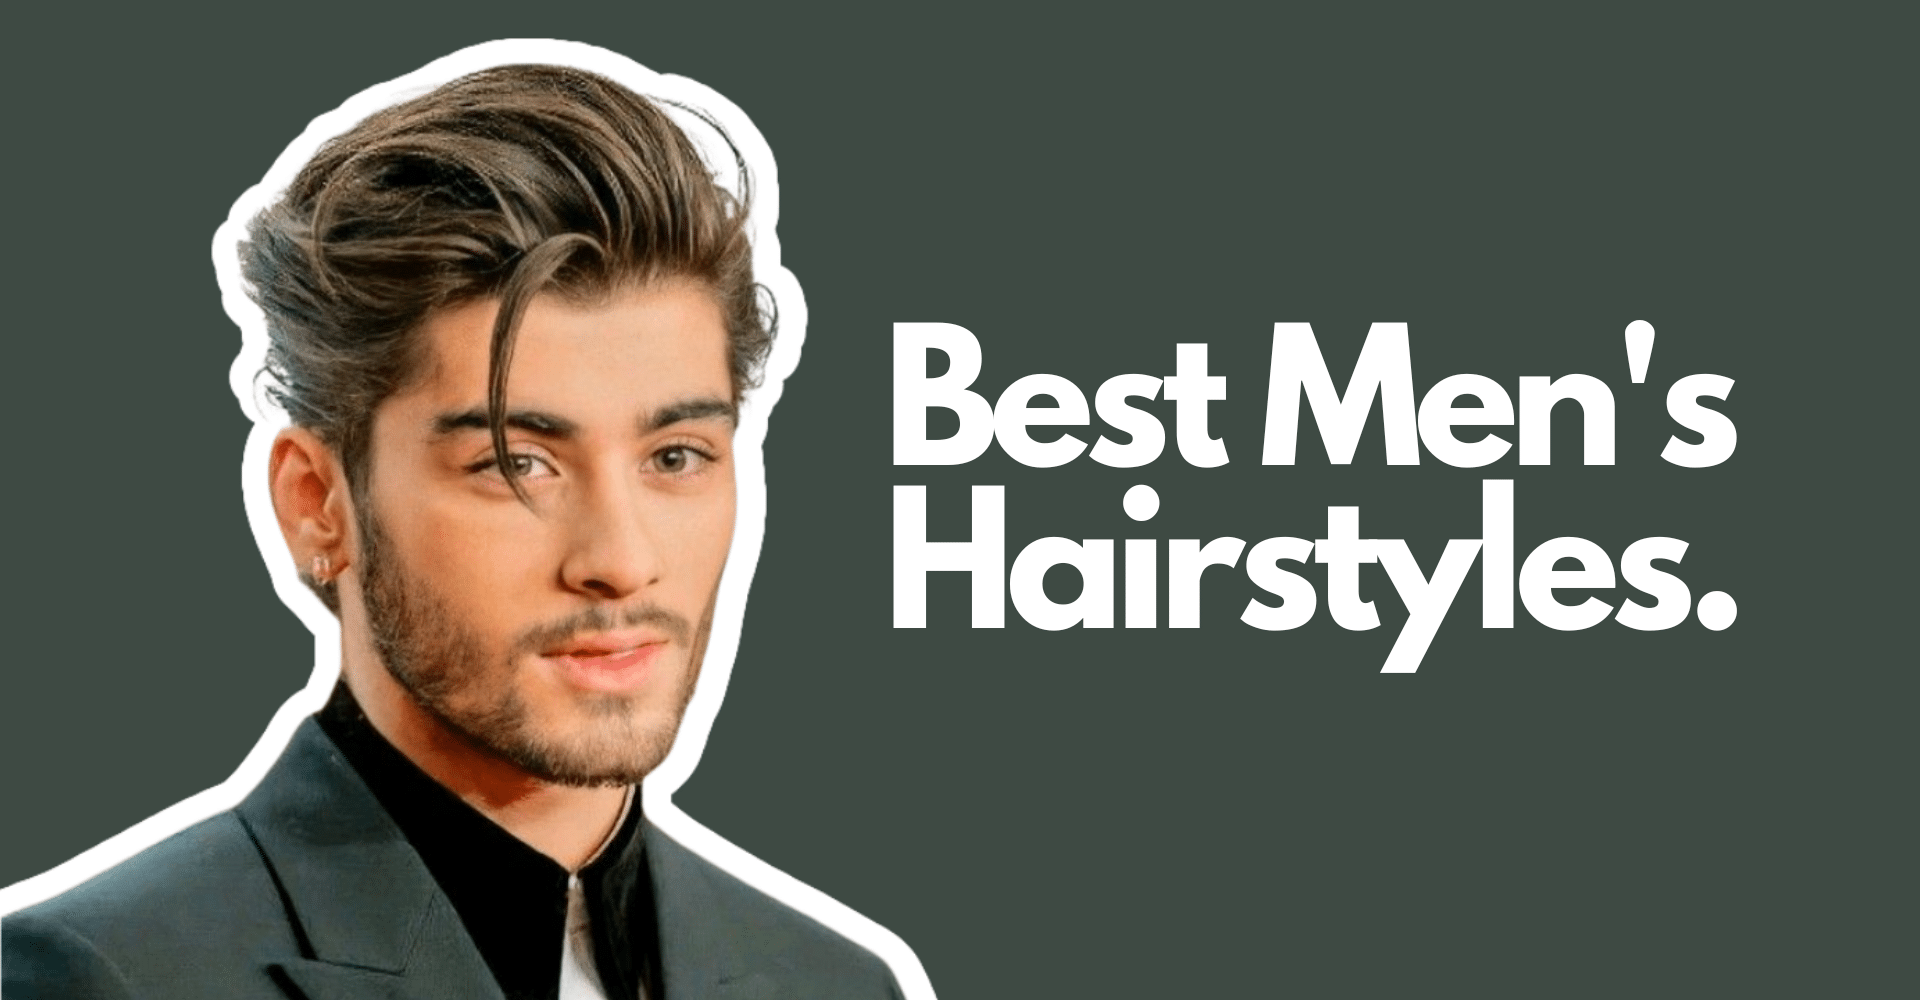 Top 30 Professional & Business Hairstyles for Men | Haircut Inspiration